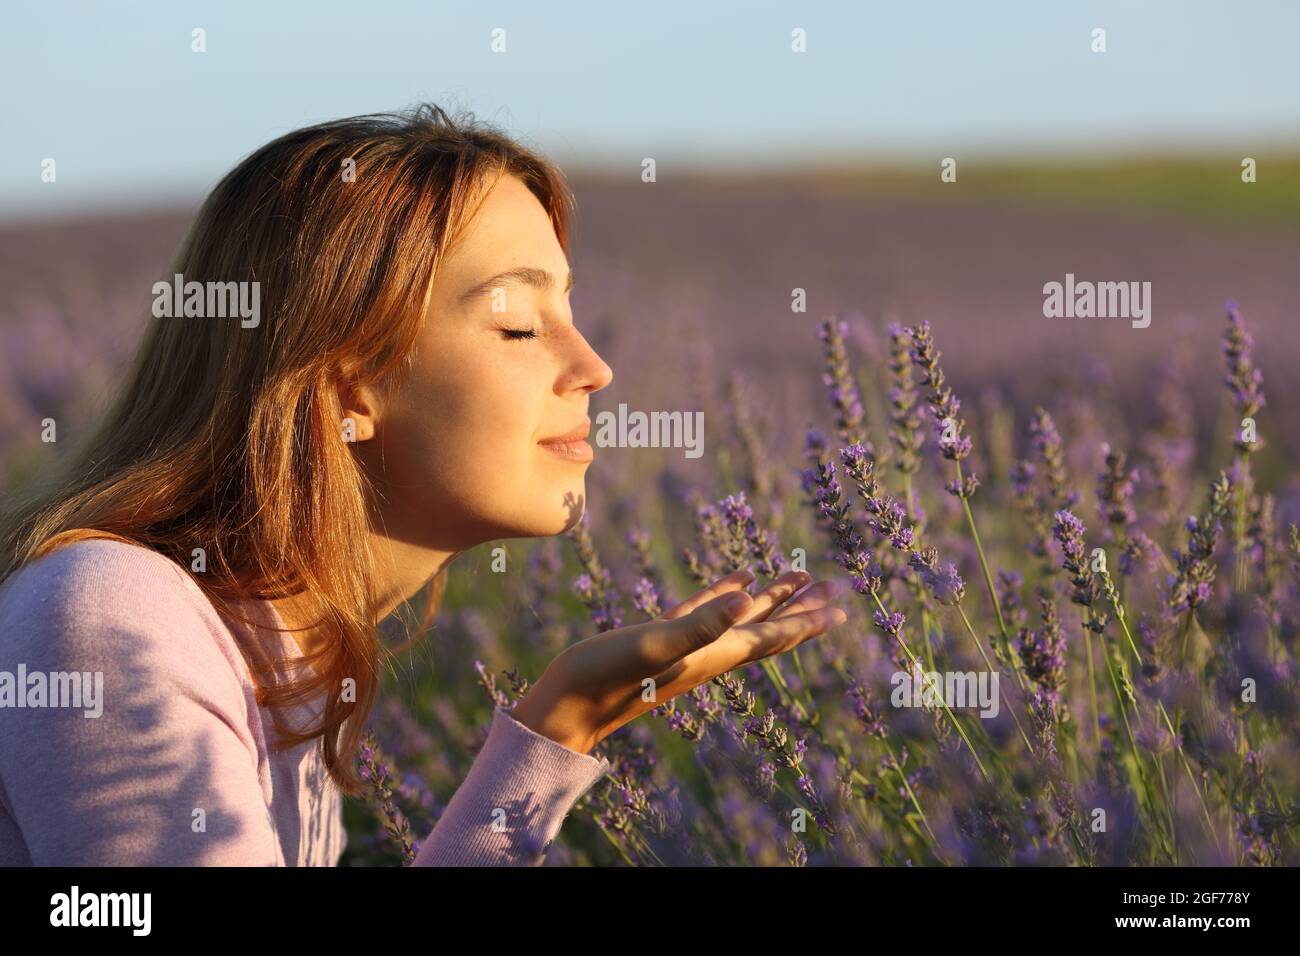 Side view portrait of a relaxed woman smelling lavender flowers in a field at sunset Stock Photo